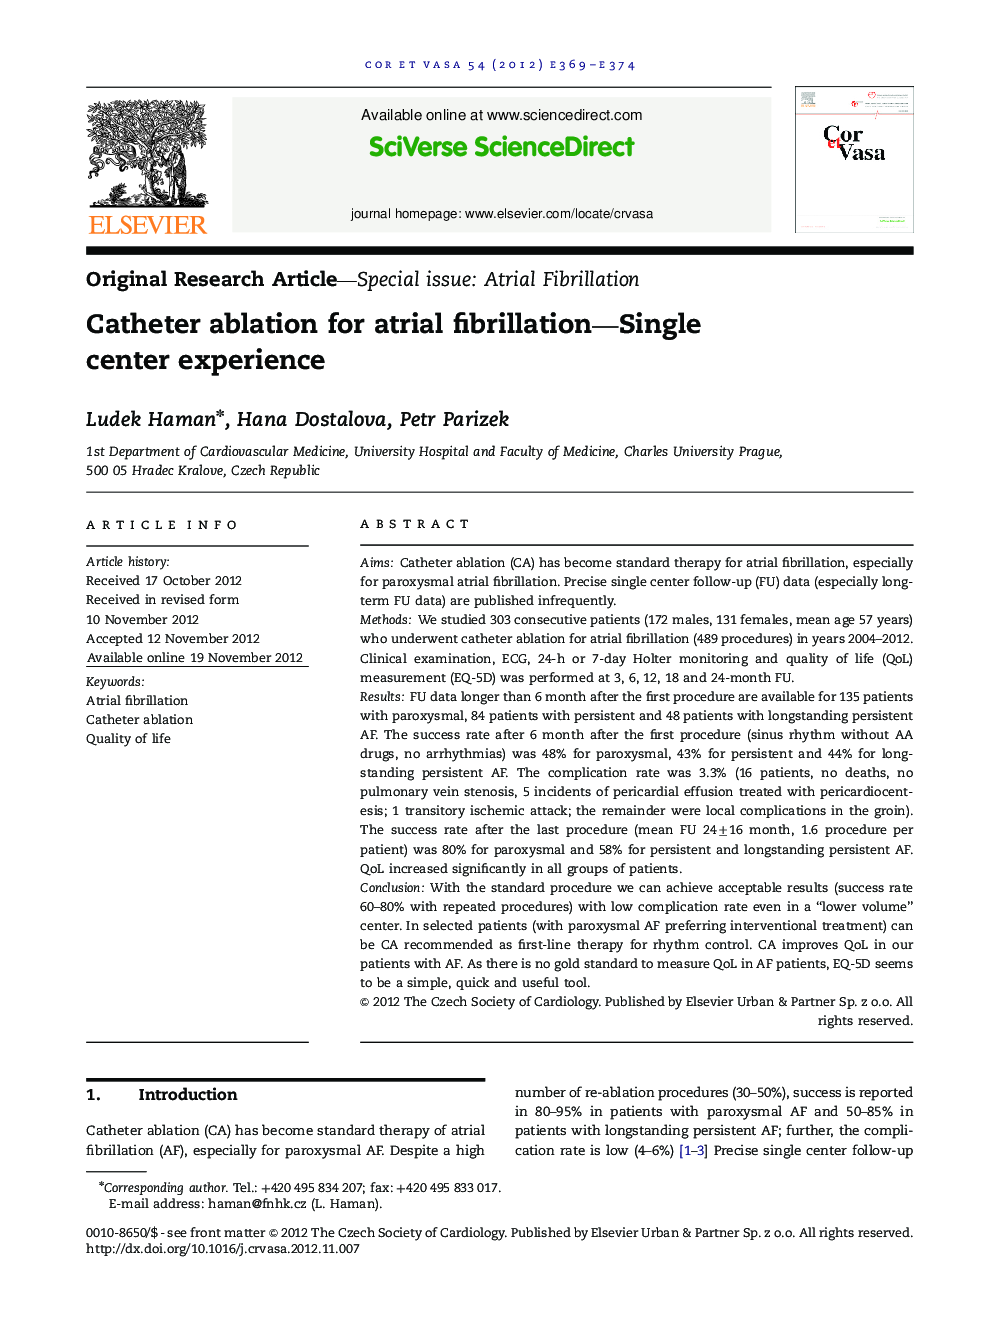 Catheter ablation for atrial fibrillation-Single center experience